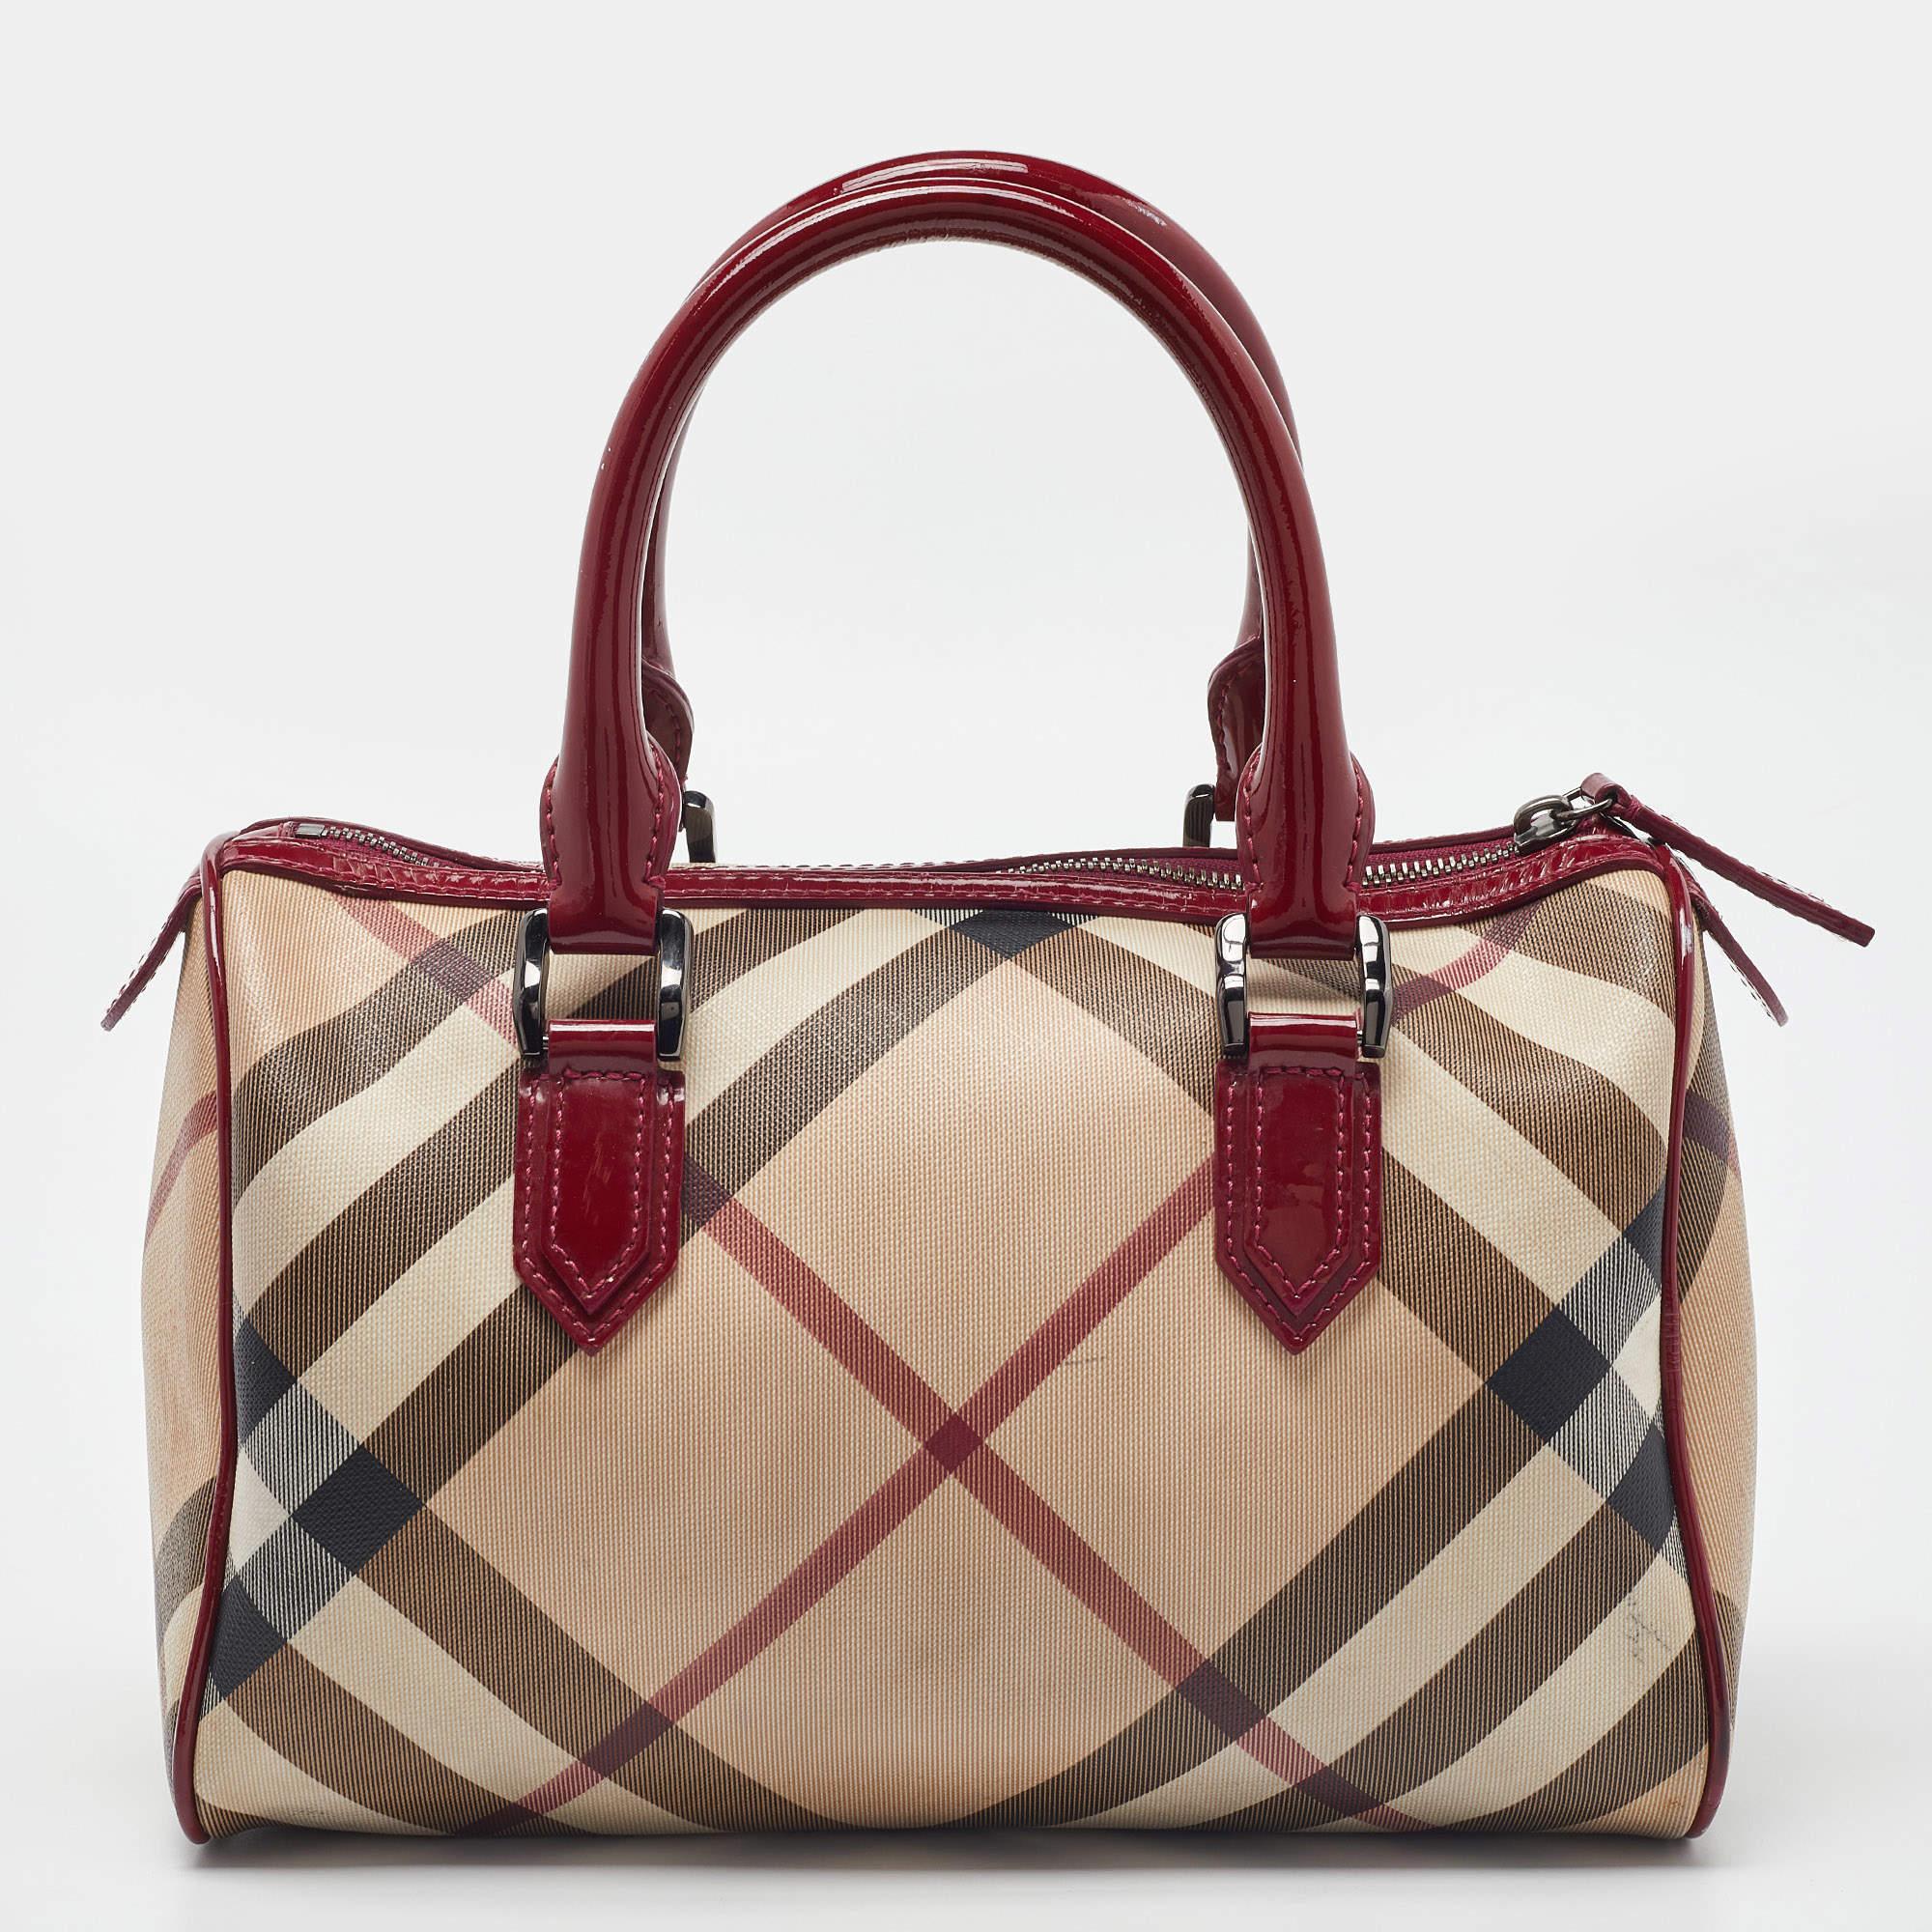 Spacious and classy, this Chester Boston bag is from Burberry. It has been crafted from their signature Nova check PVC and accented with leather trims and black-tone hardware. It is equipped with a well-sized fabric interior and two handles.

